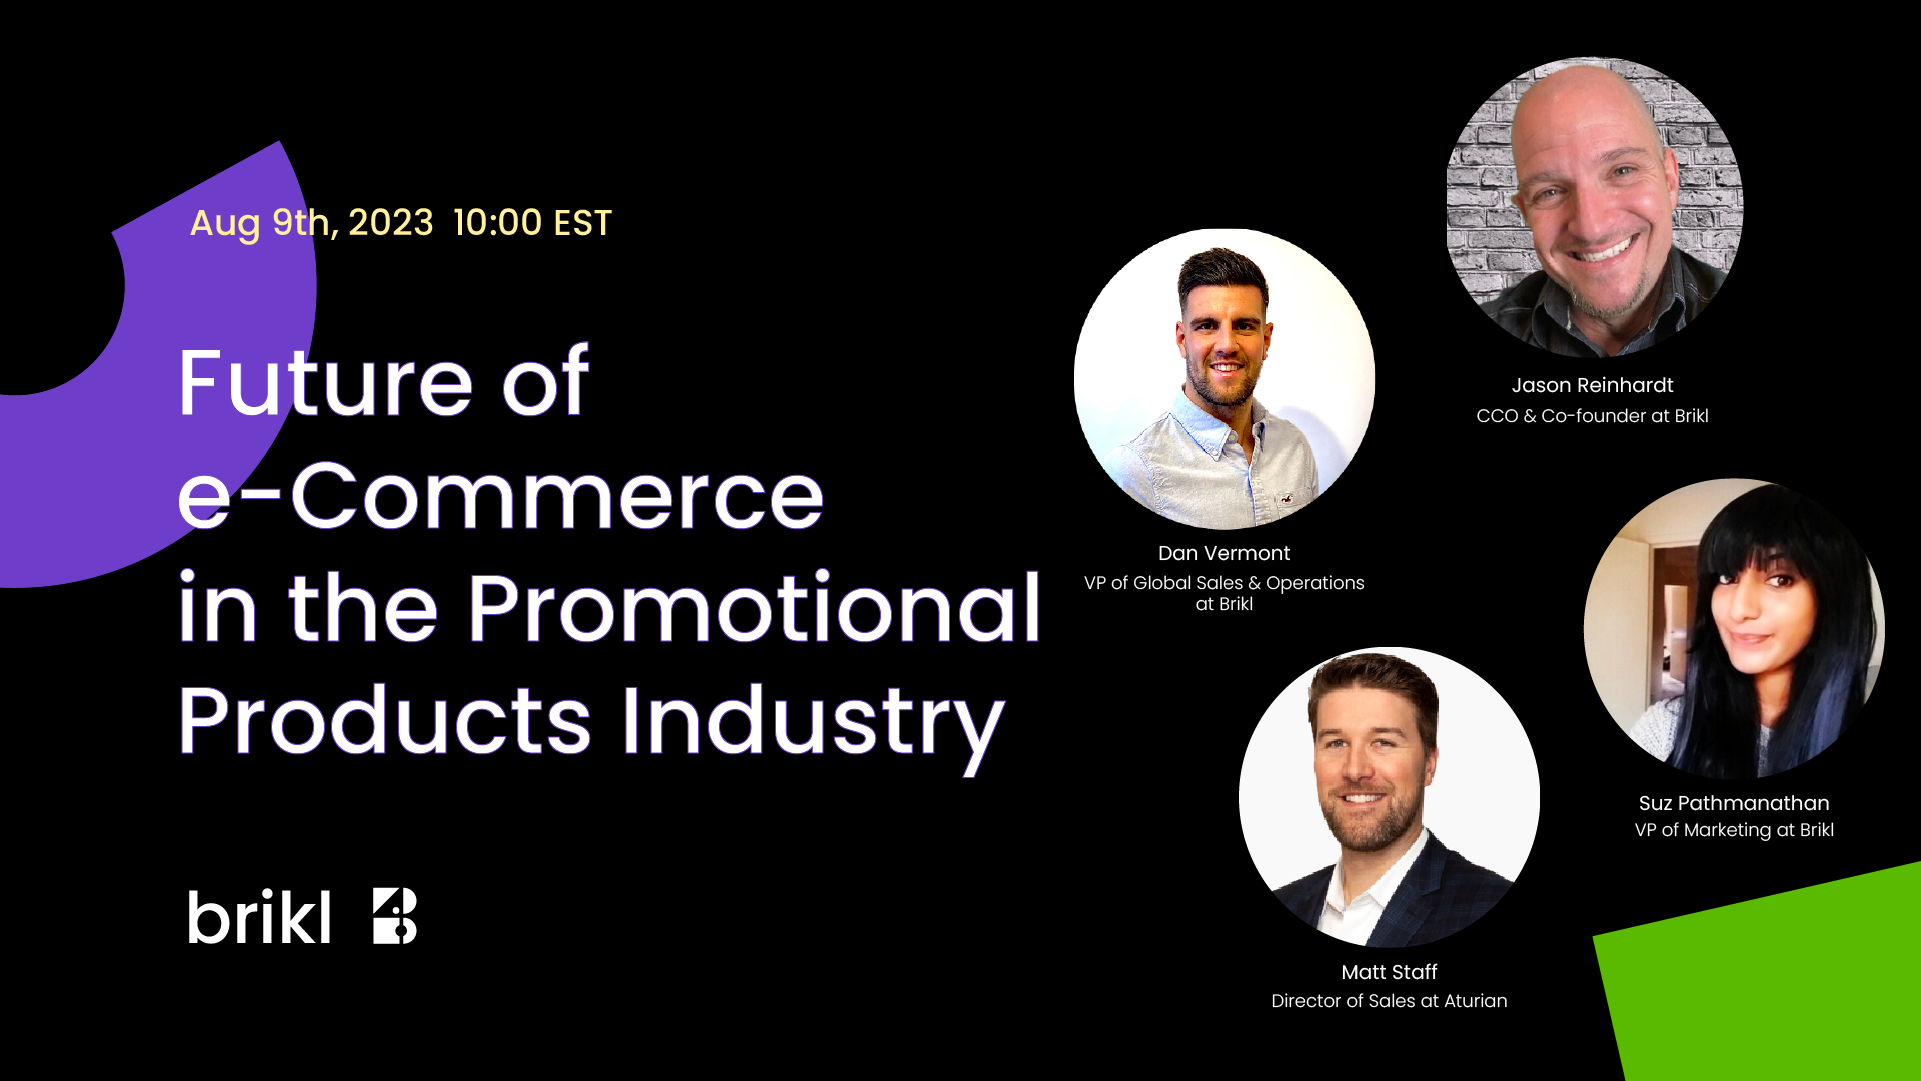 The Future of e-Commerce: Your Ticket to Promotional Products Success!